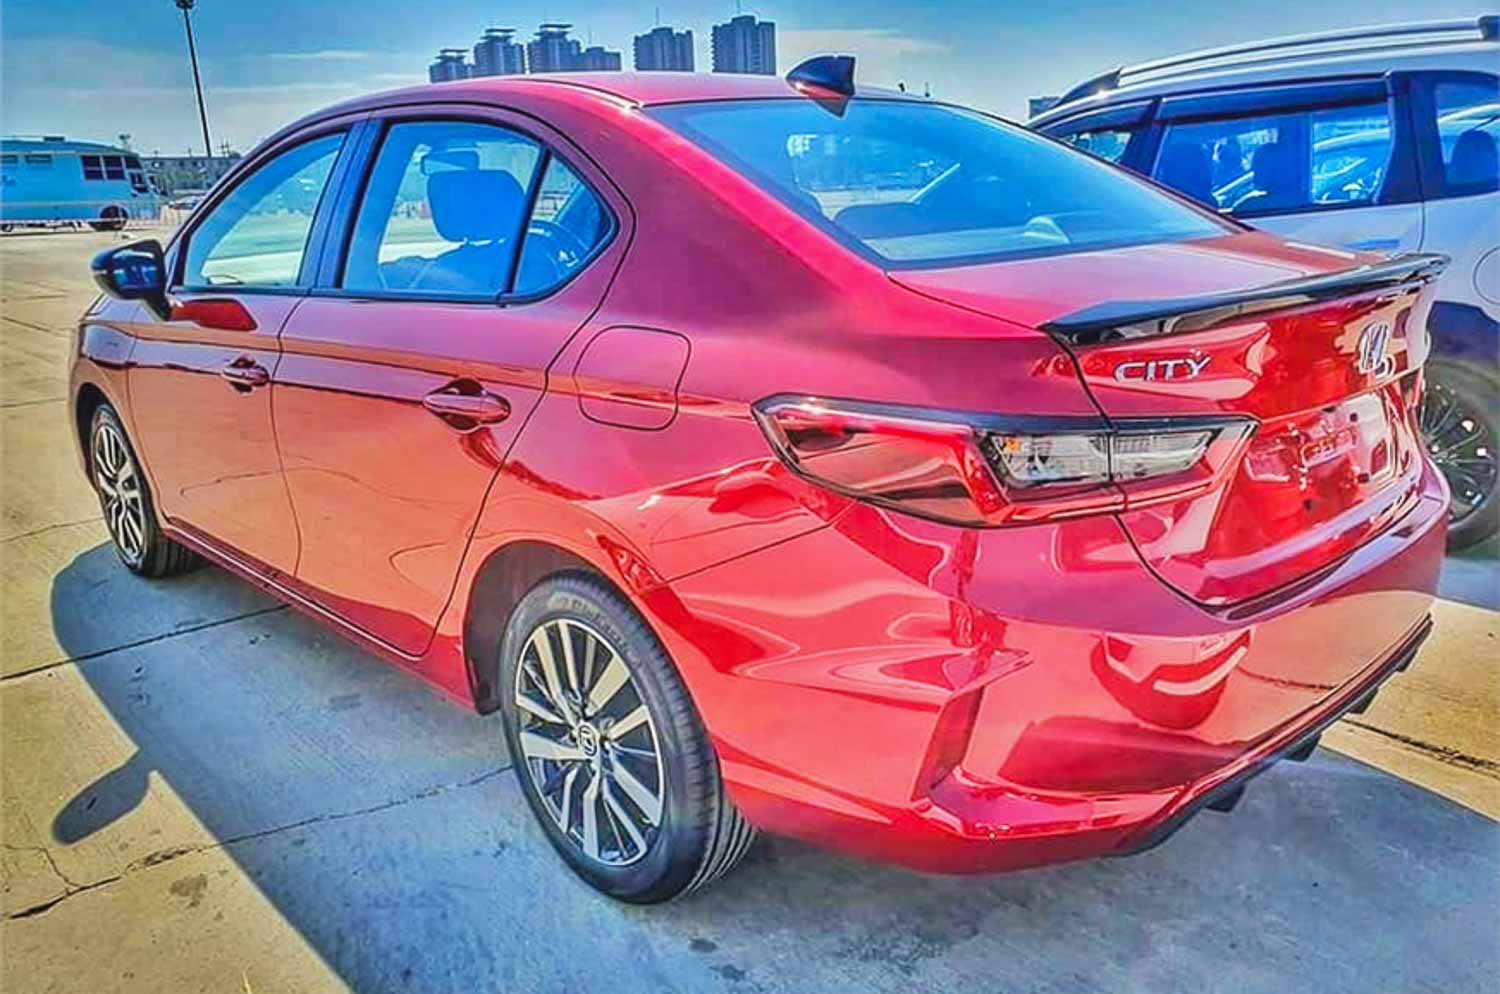 2020 Honda City BS6 features list - Full-LEDs, ESP, G-meter, 6 airbags